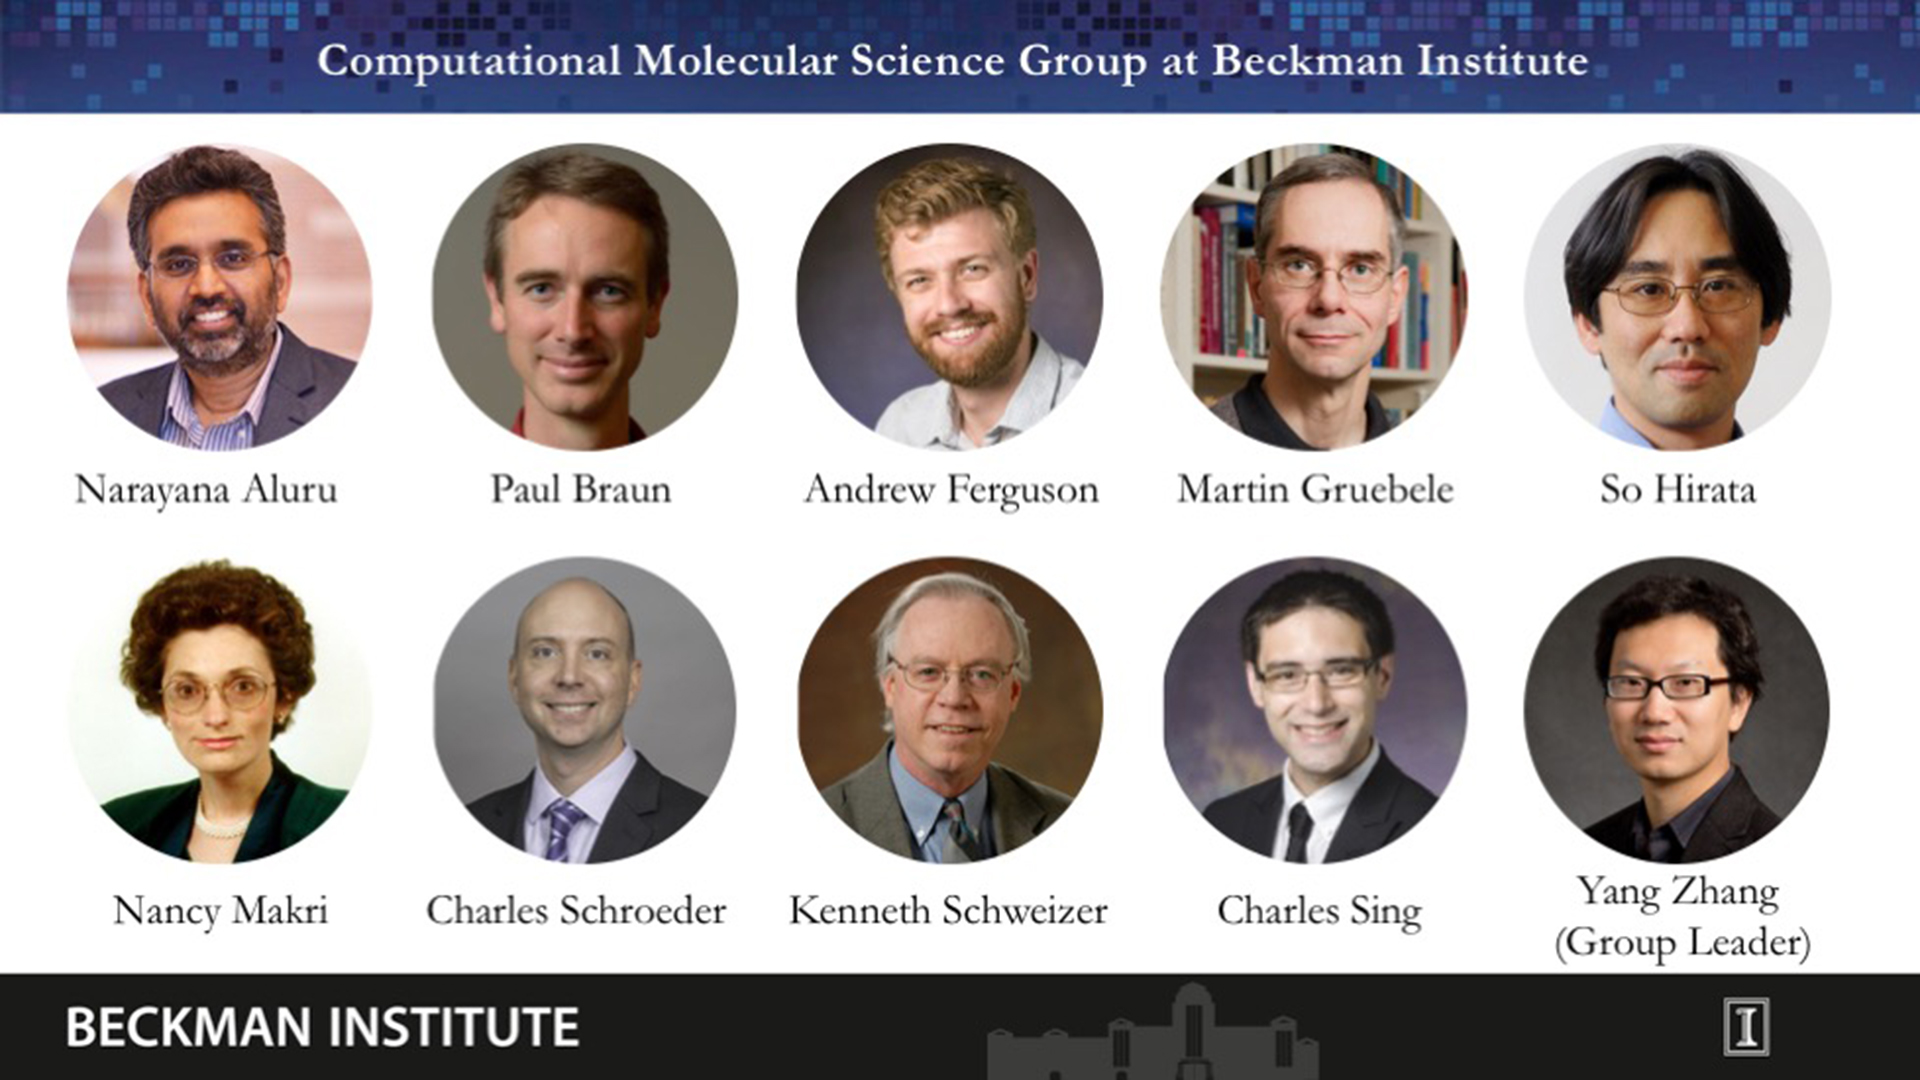 Zhang leads Computational Molecular Science Group at Beckman Institute